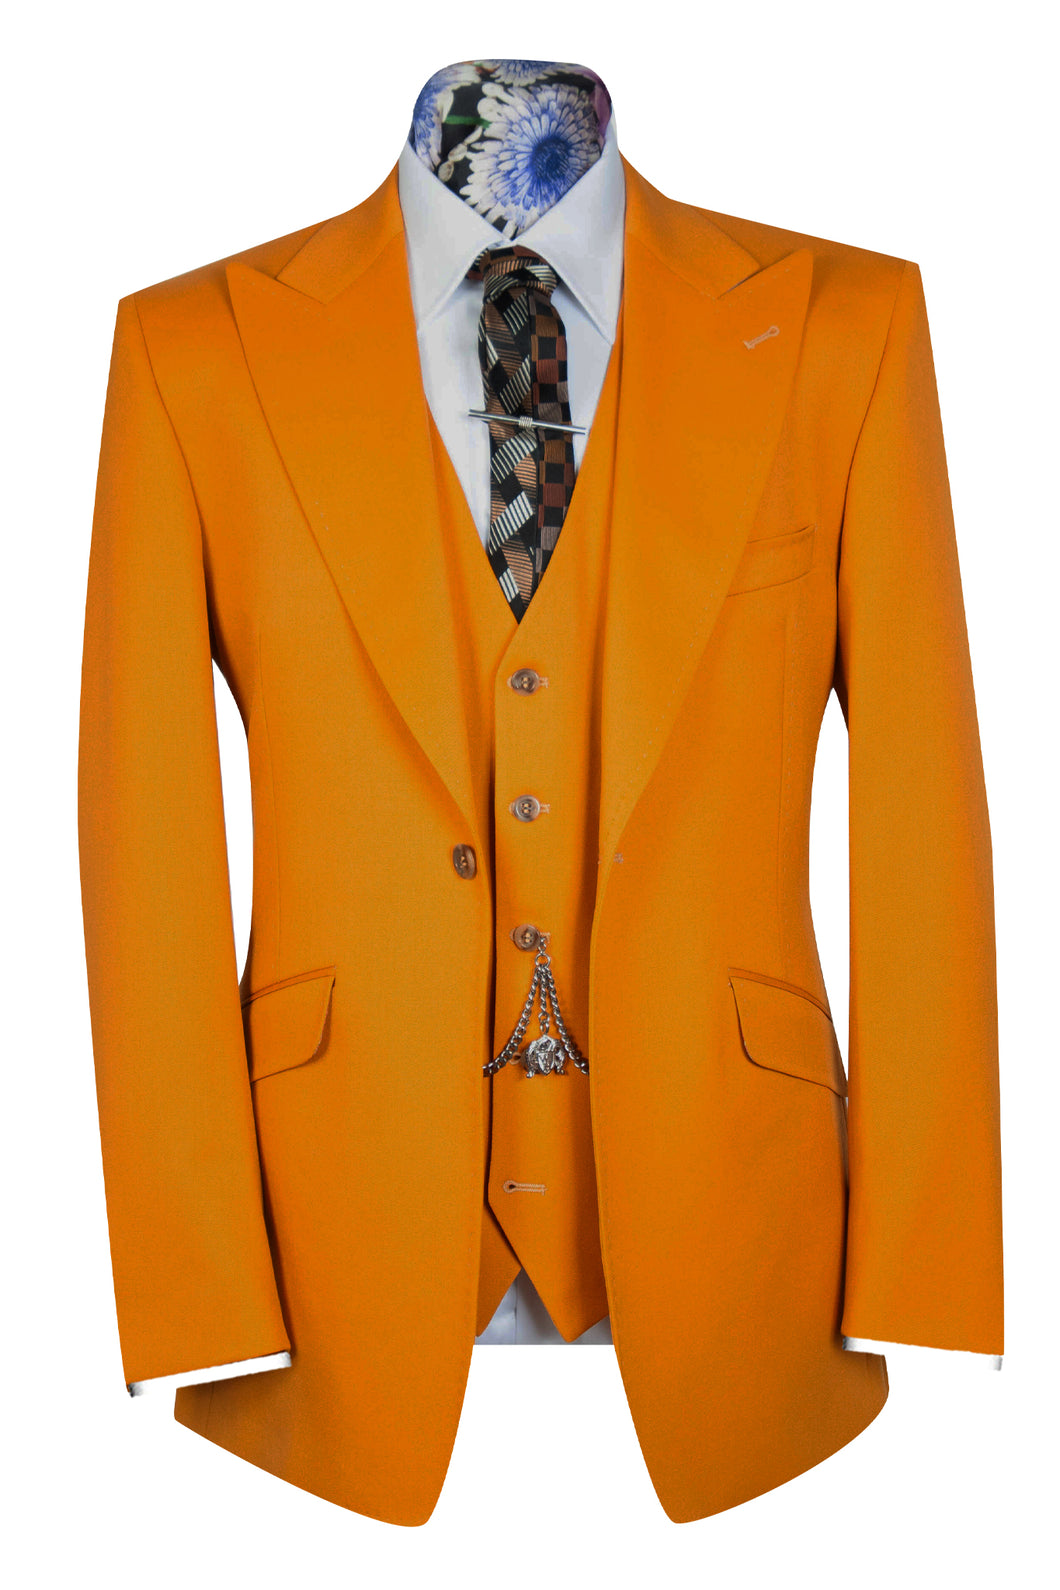 The Clarence Ochre Yellow Suit